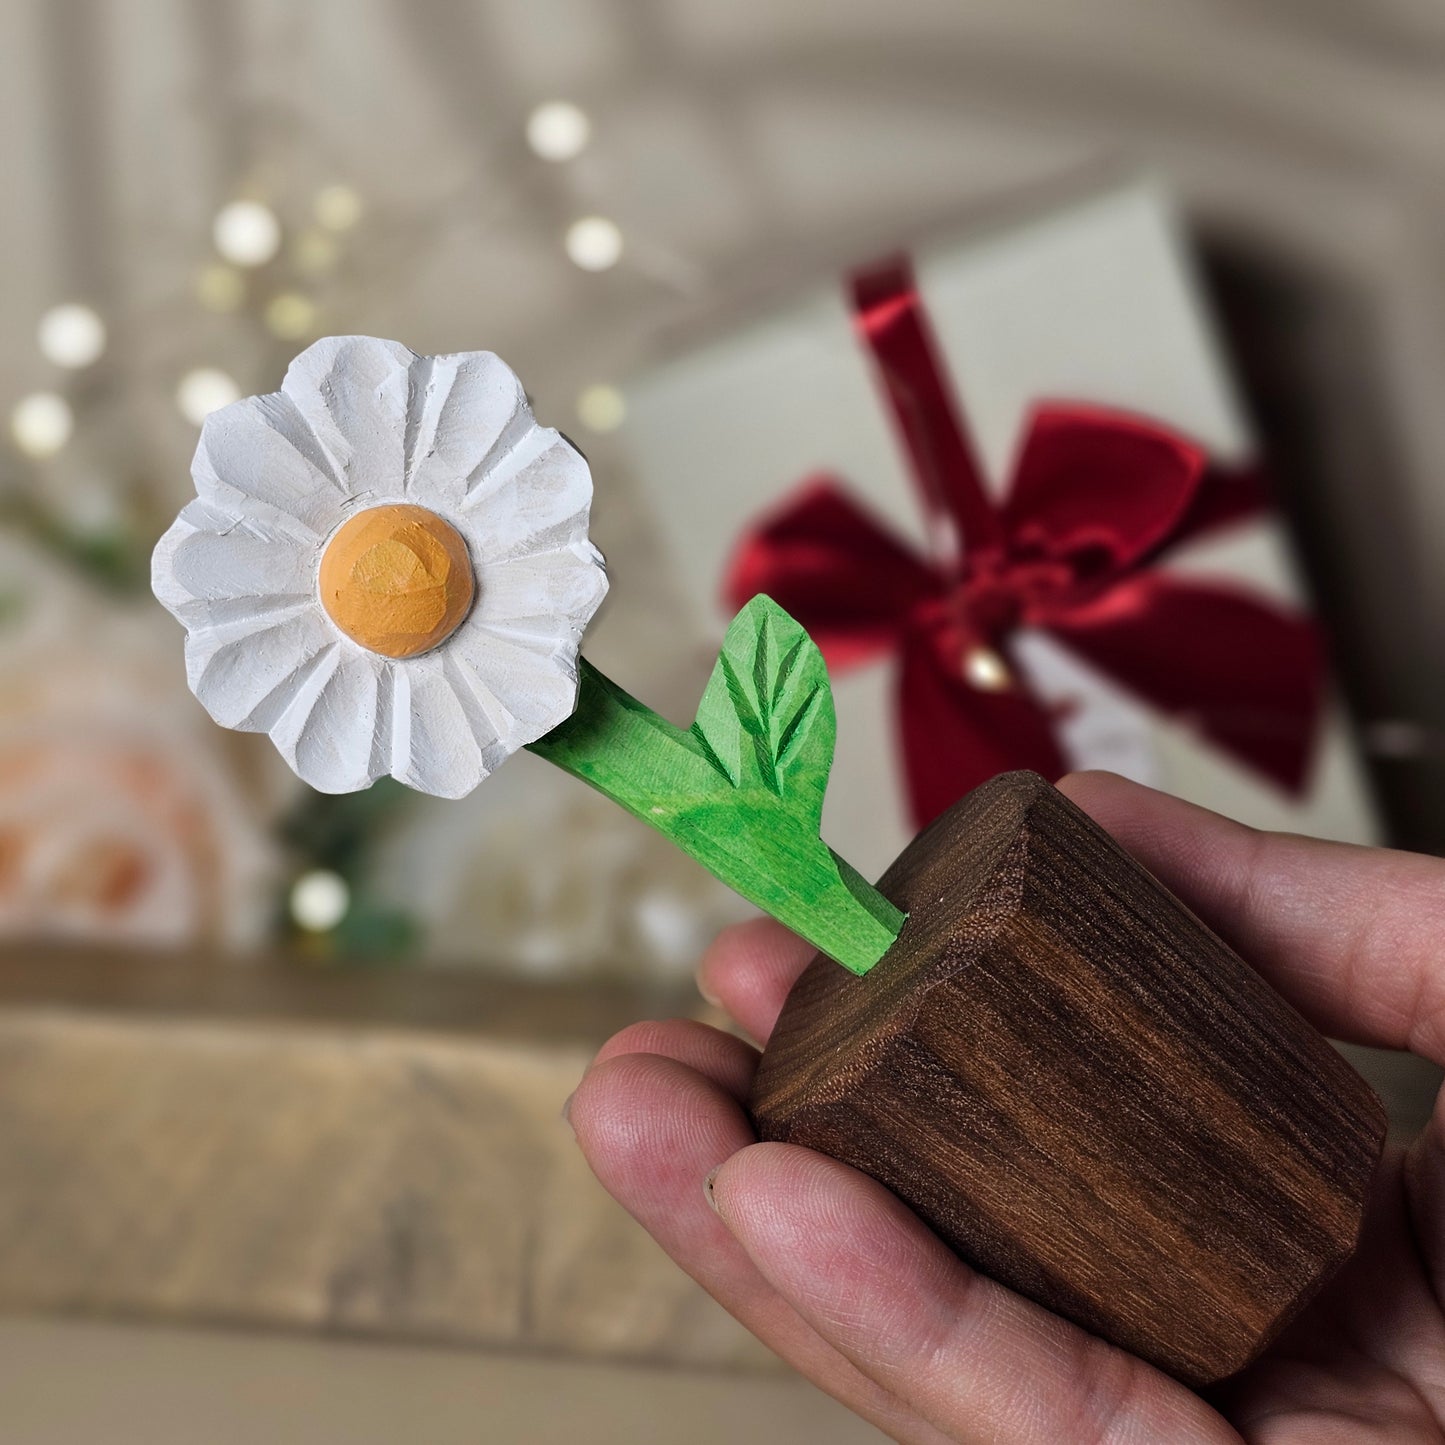 Handcrafted Daisy Wooden Sculpture